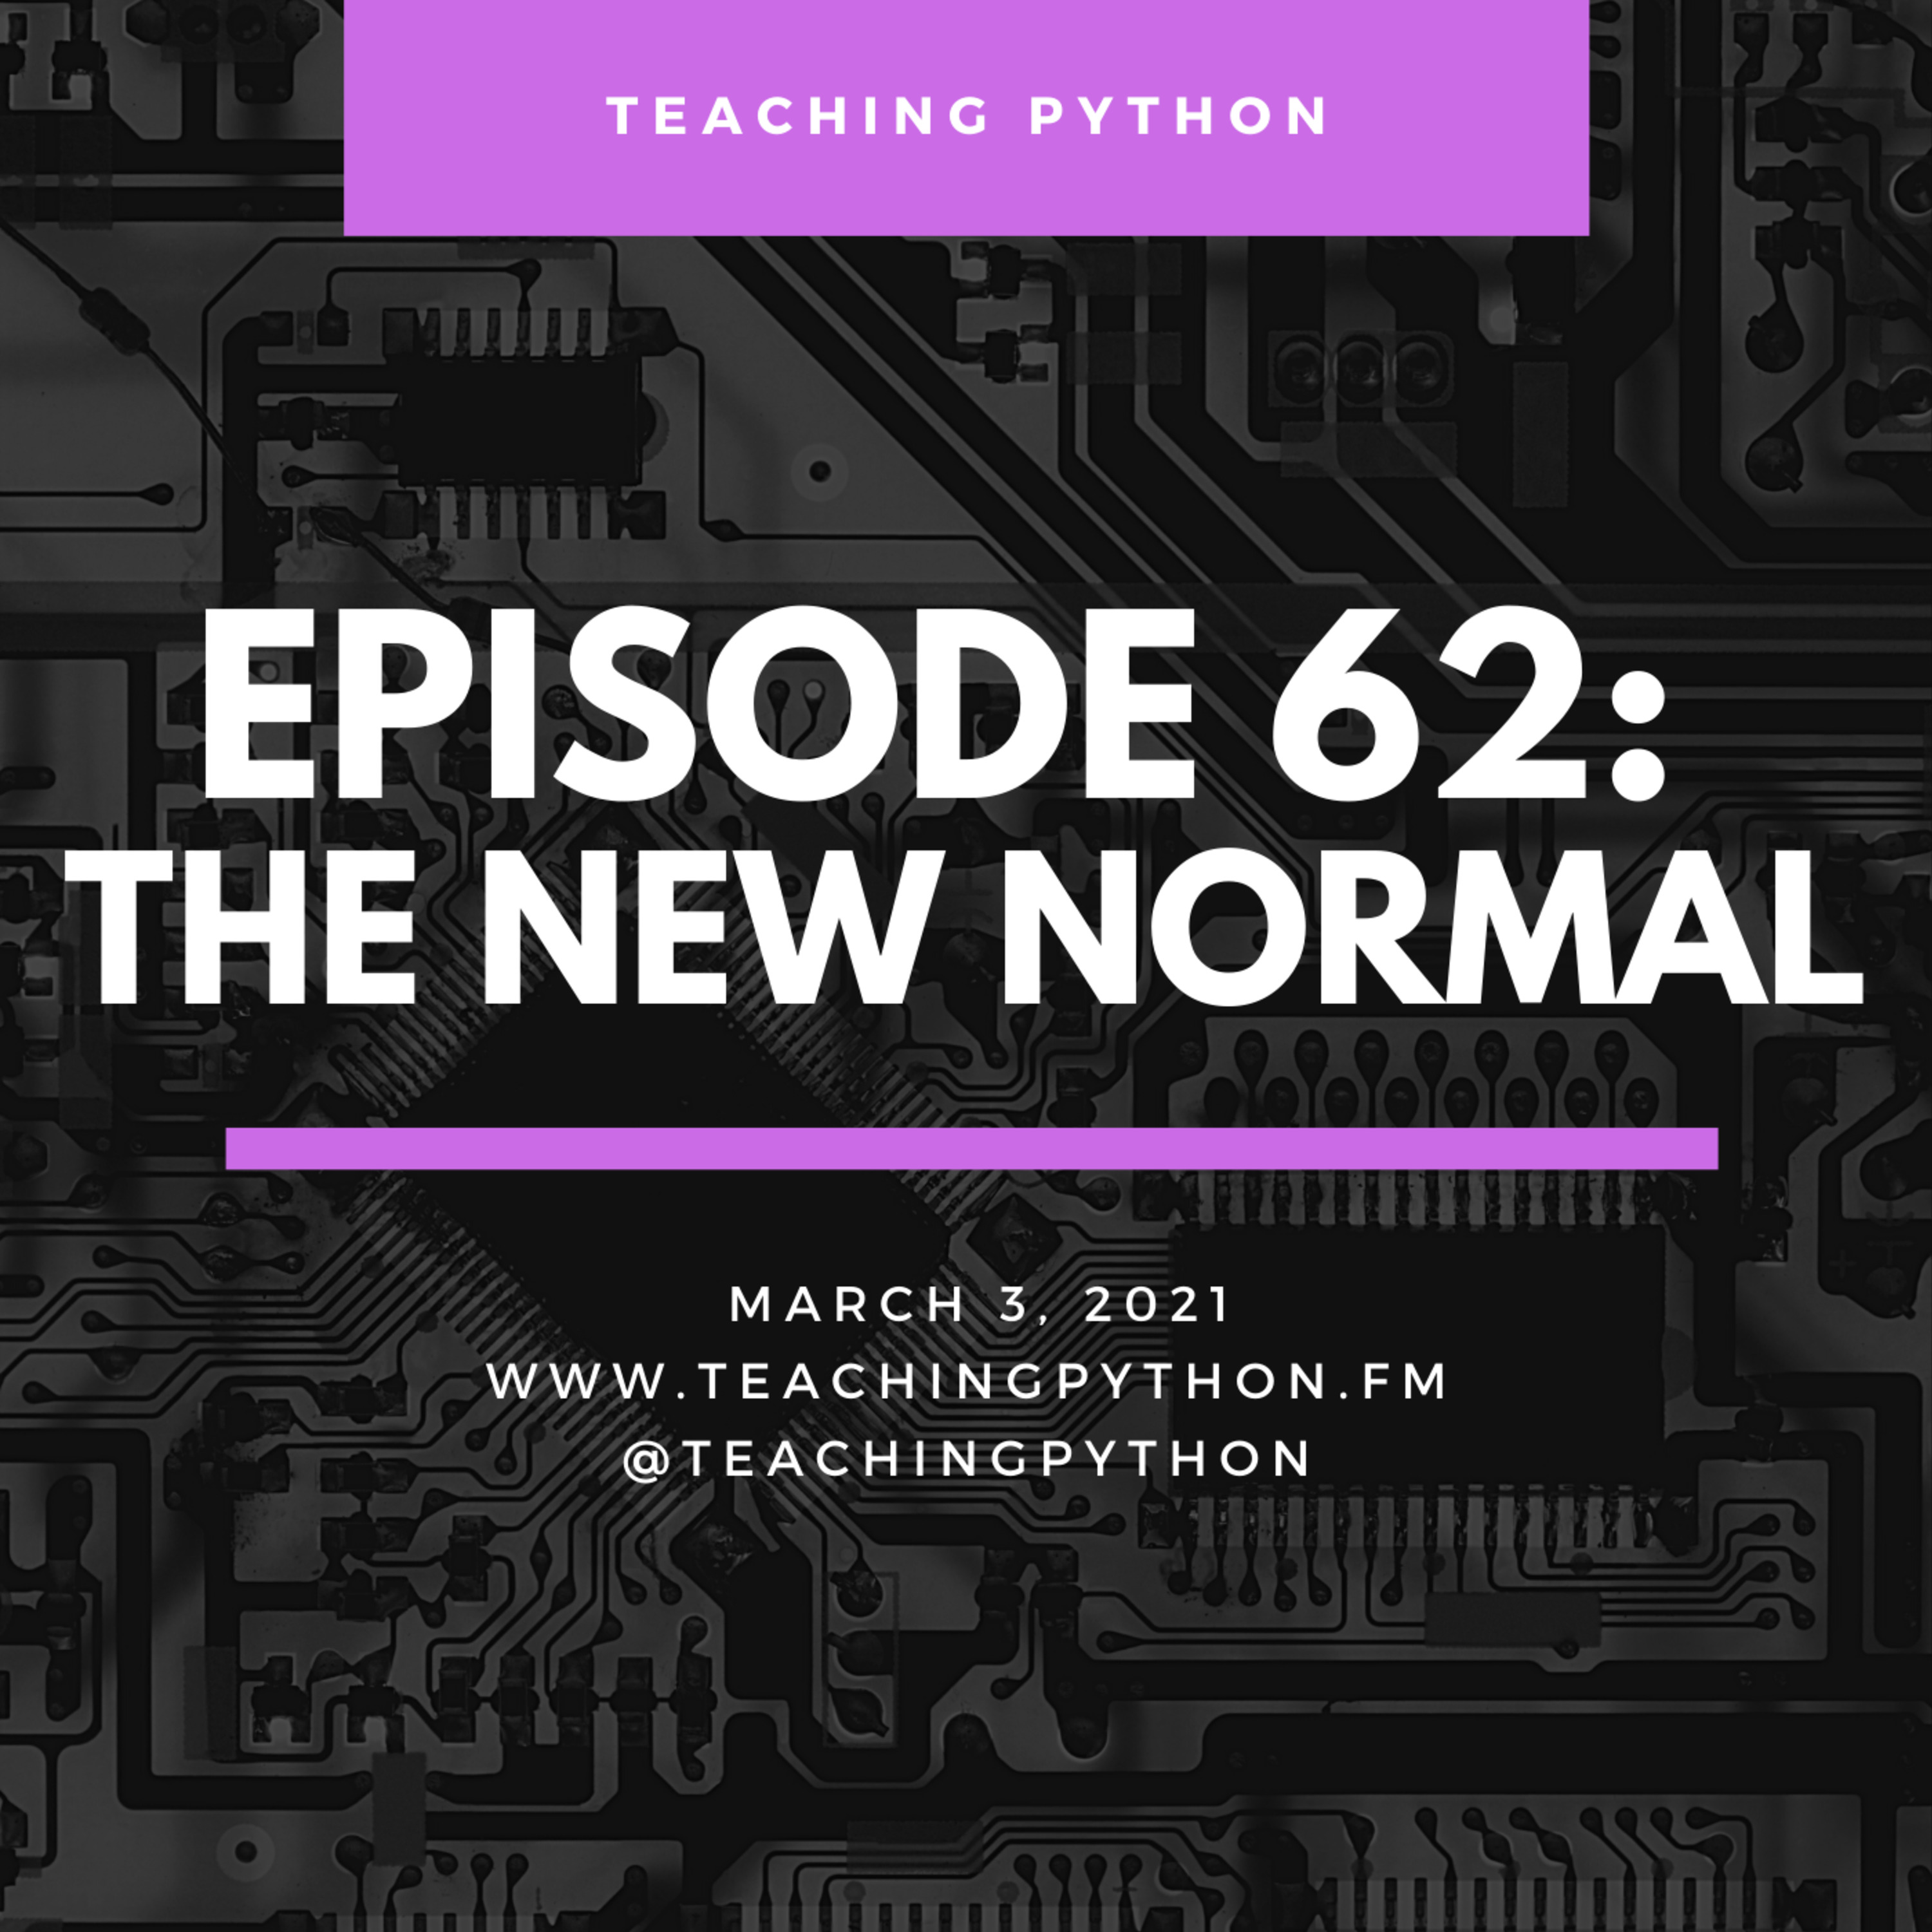 Episode 62: The New Normal